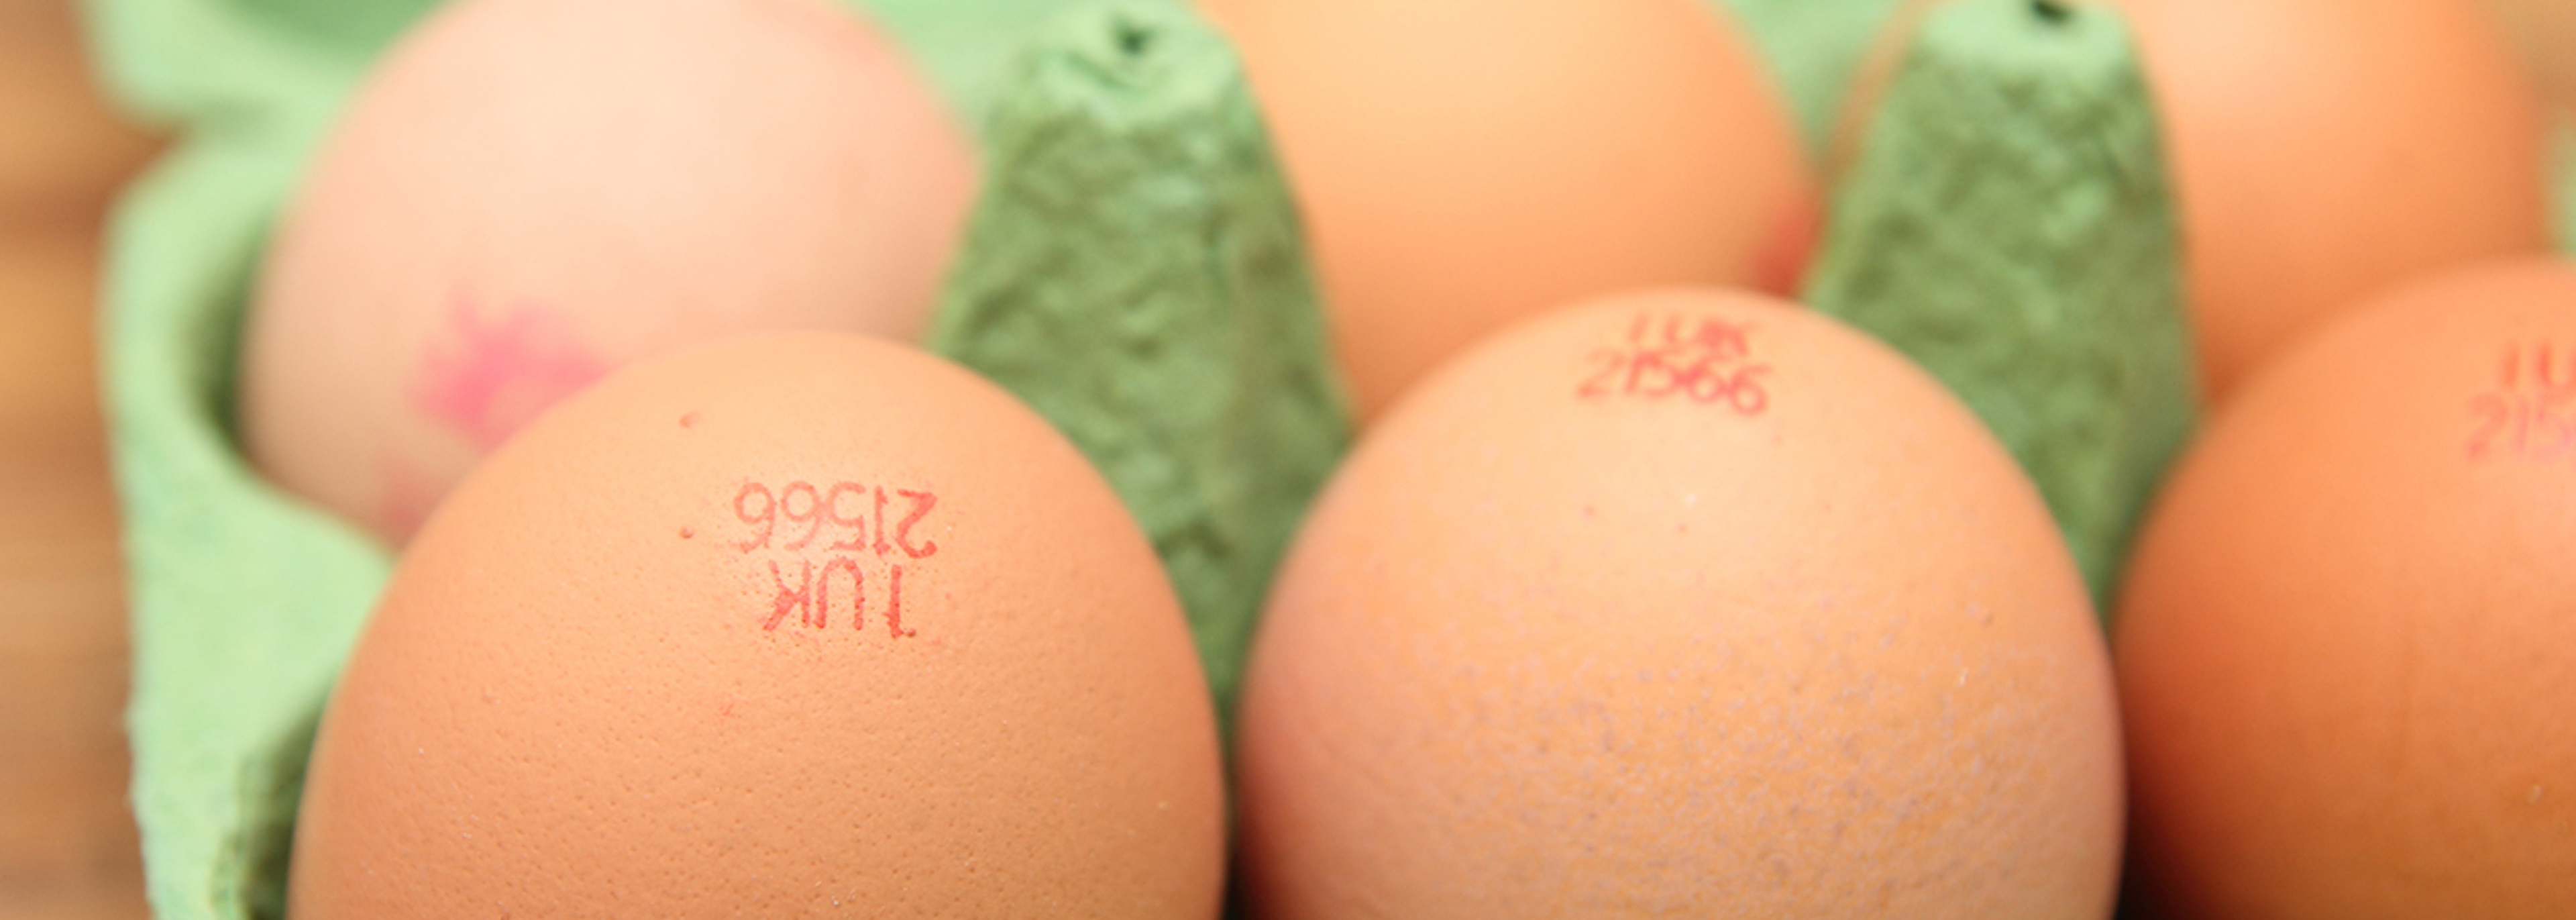 Call for stronger deterrent after 'relatively small' egg fine